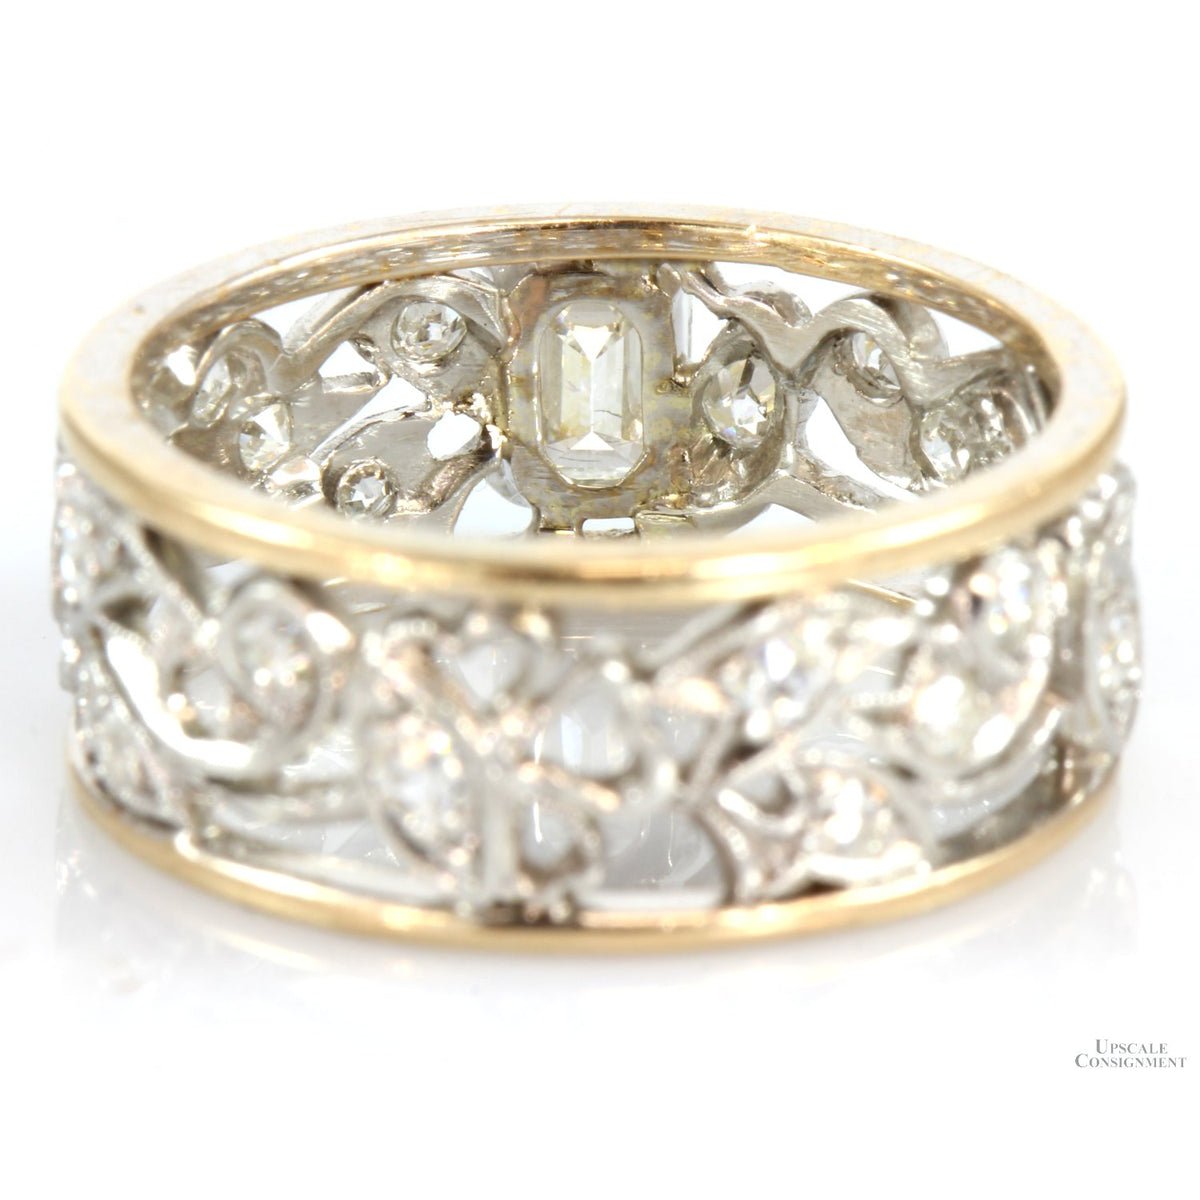 Edwardian Revival Style .90ctw Diamond Ring - .44ct Solitaire